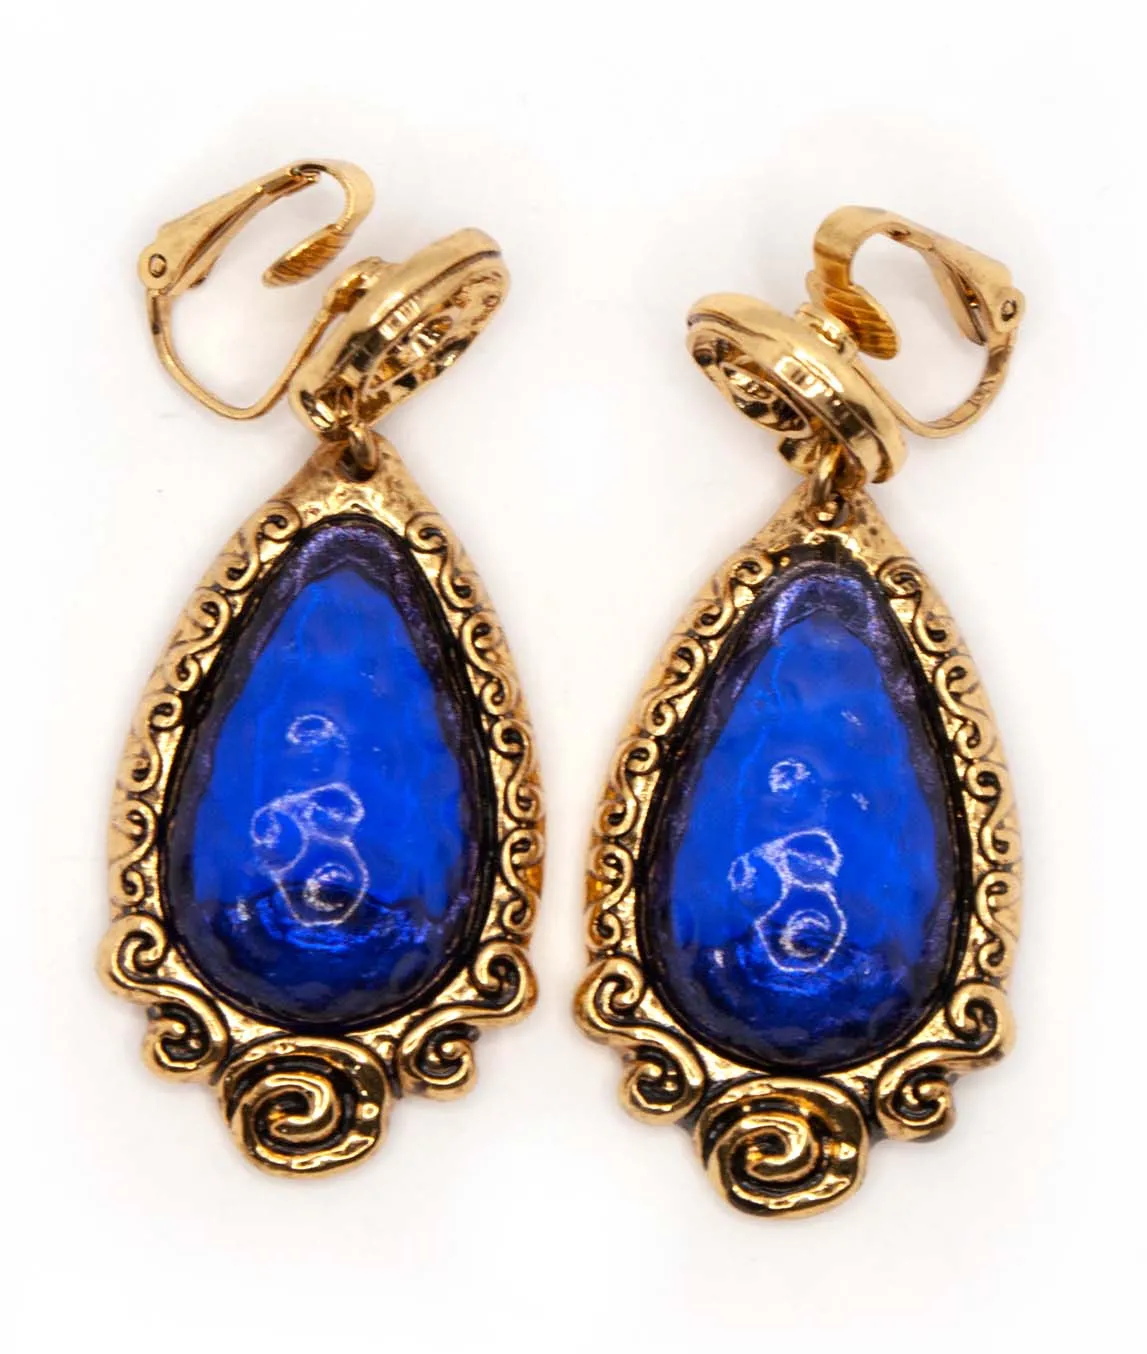 Blue glass gold plated drop earrings by Christian Lacroix vintage